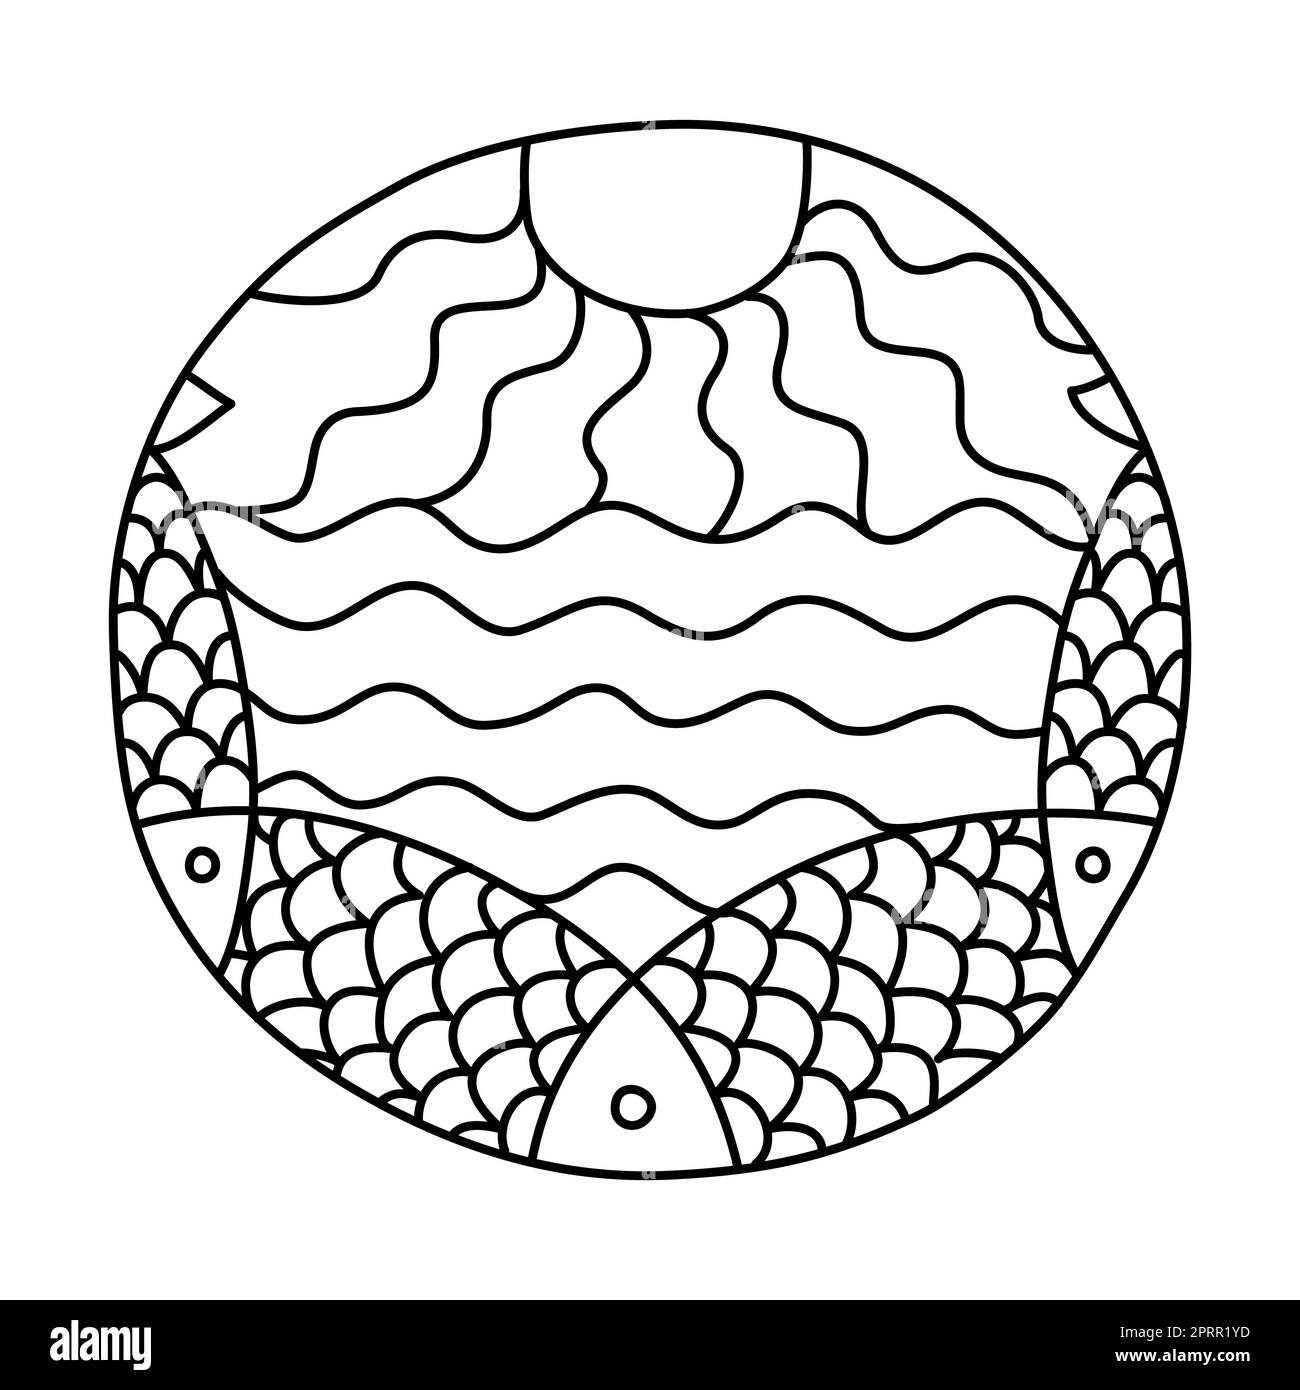 Round coloring page filled with hand drawn doodle motifs in a circle, isolated on white background. Vector illustration Stock Photo